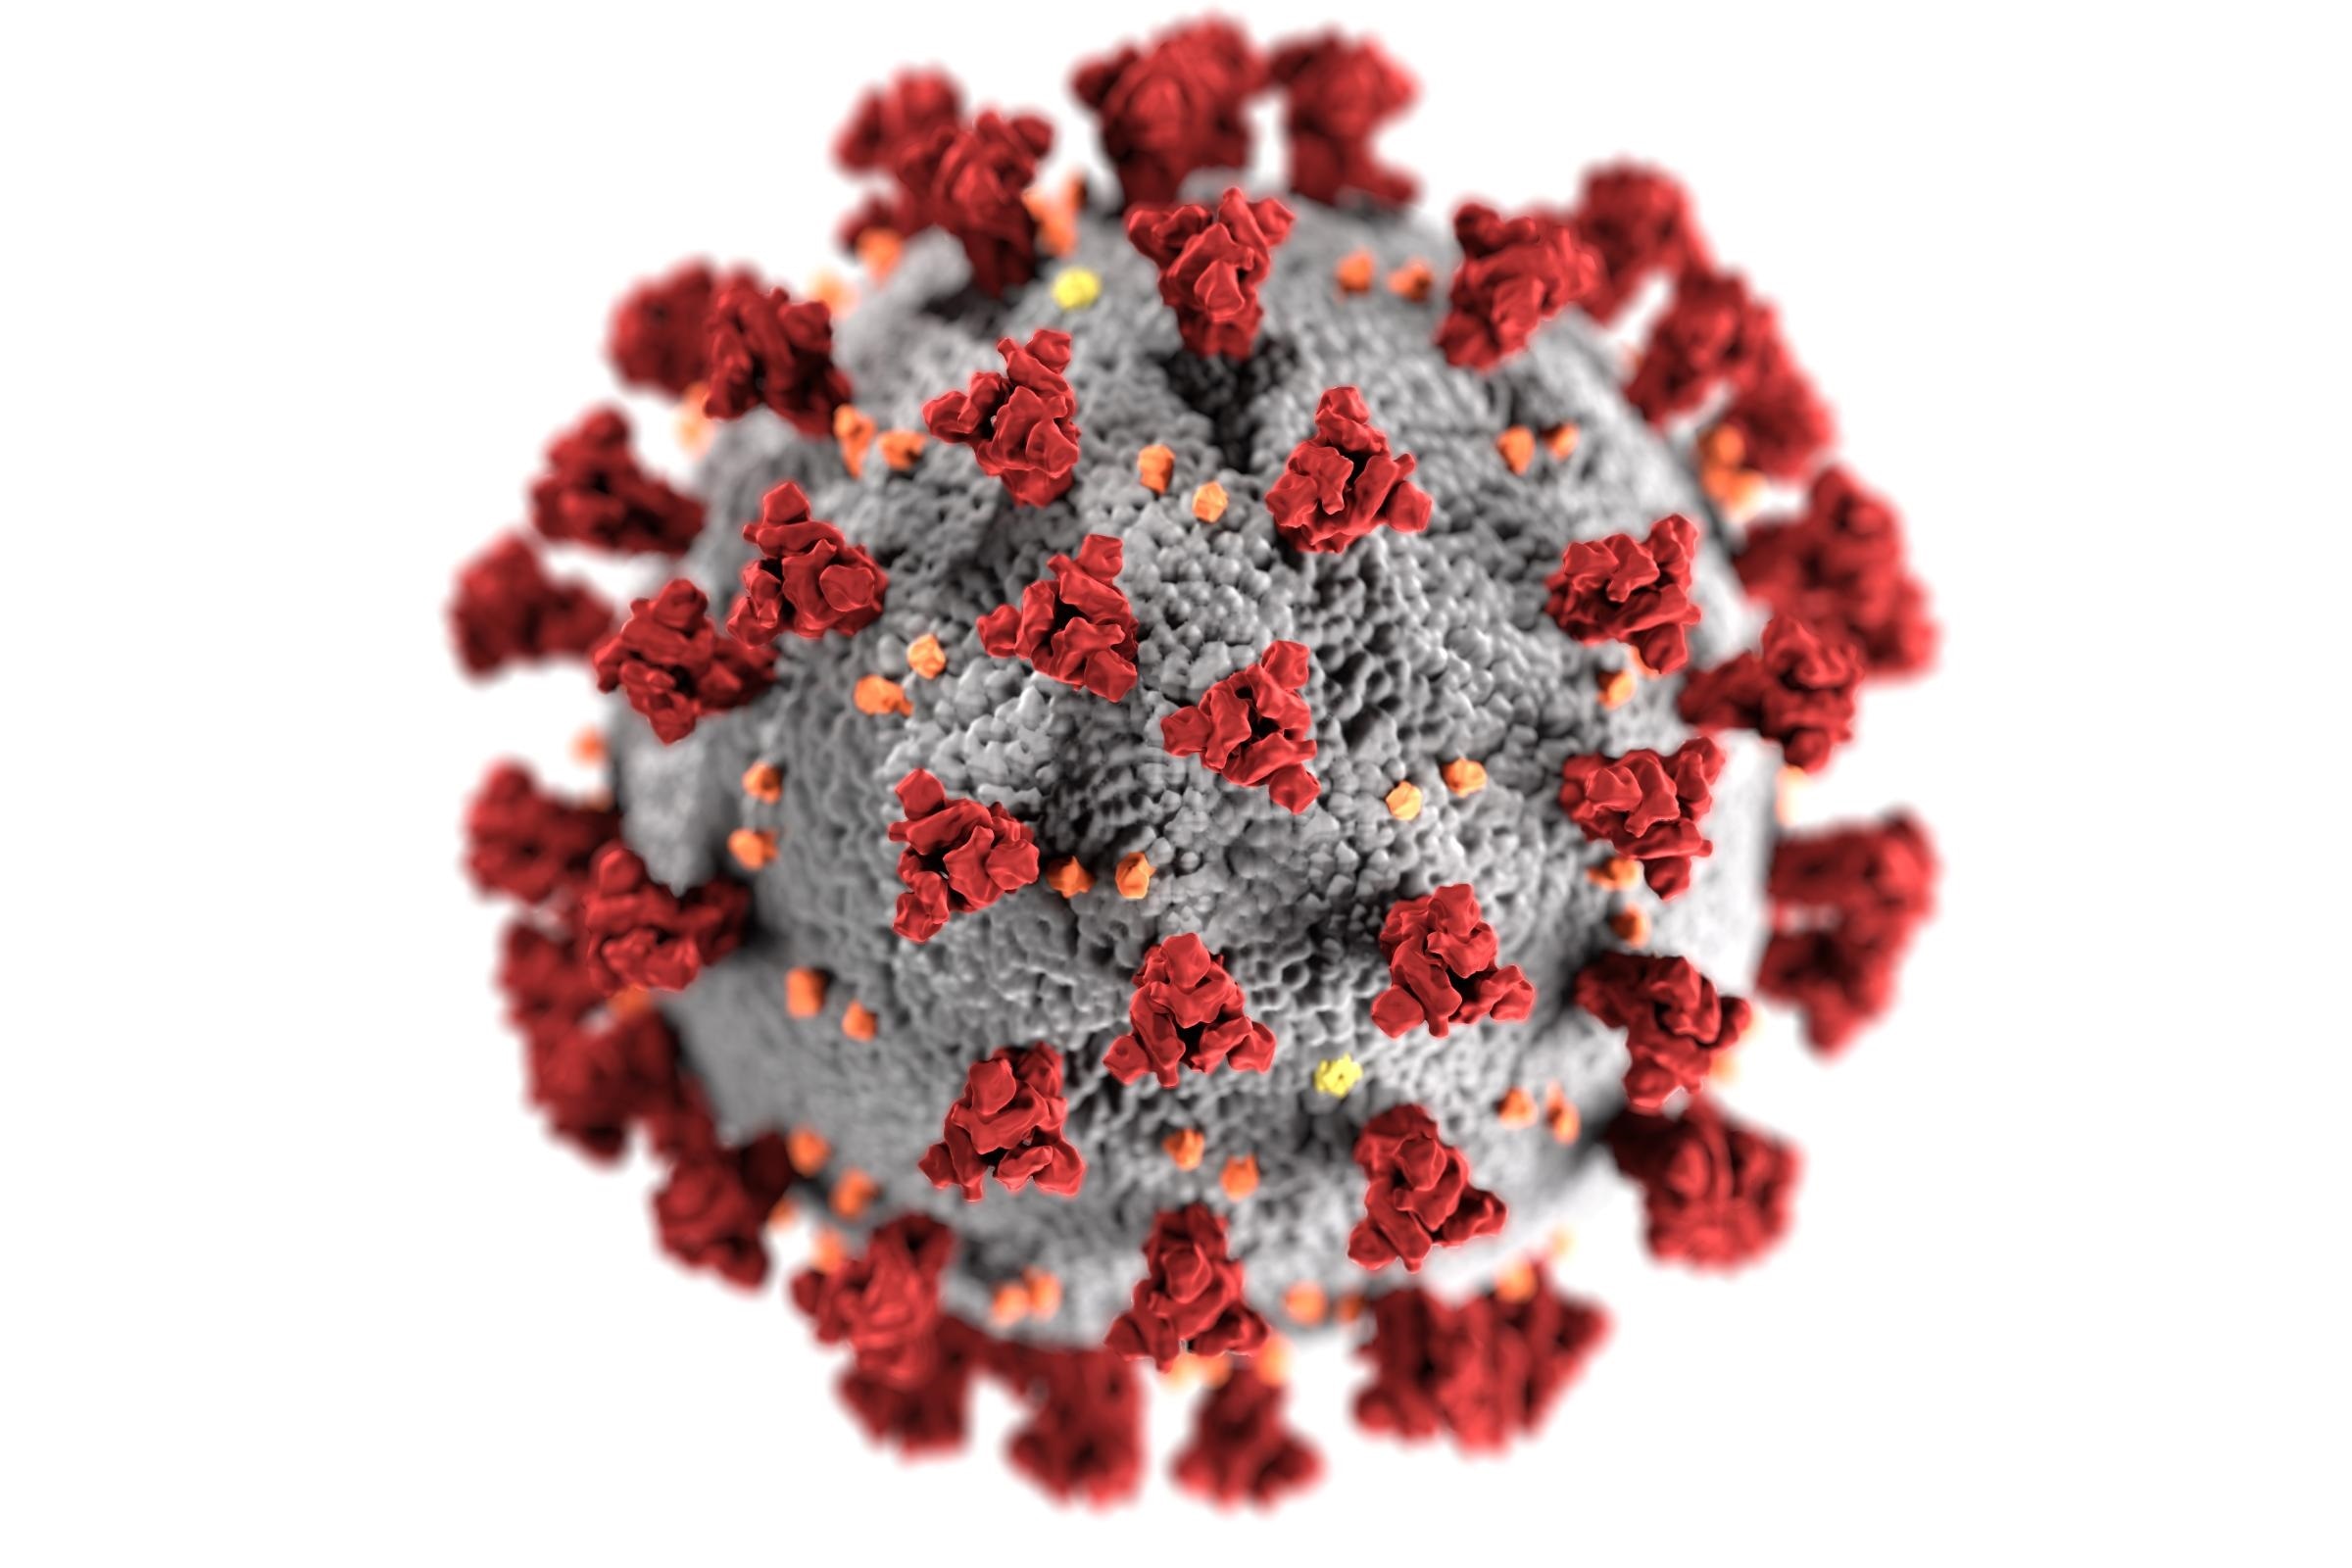 Study shows how the immune system effectively combats coronavirus to prevent pneumonia